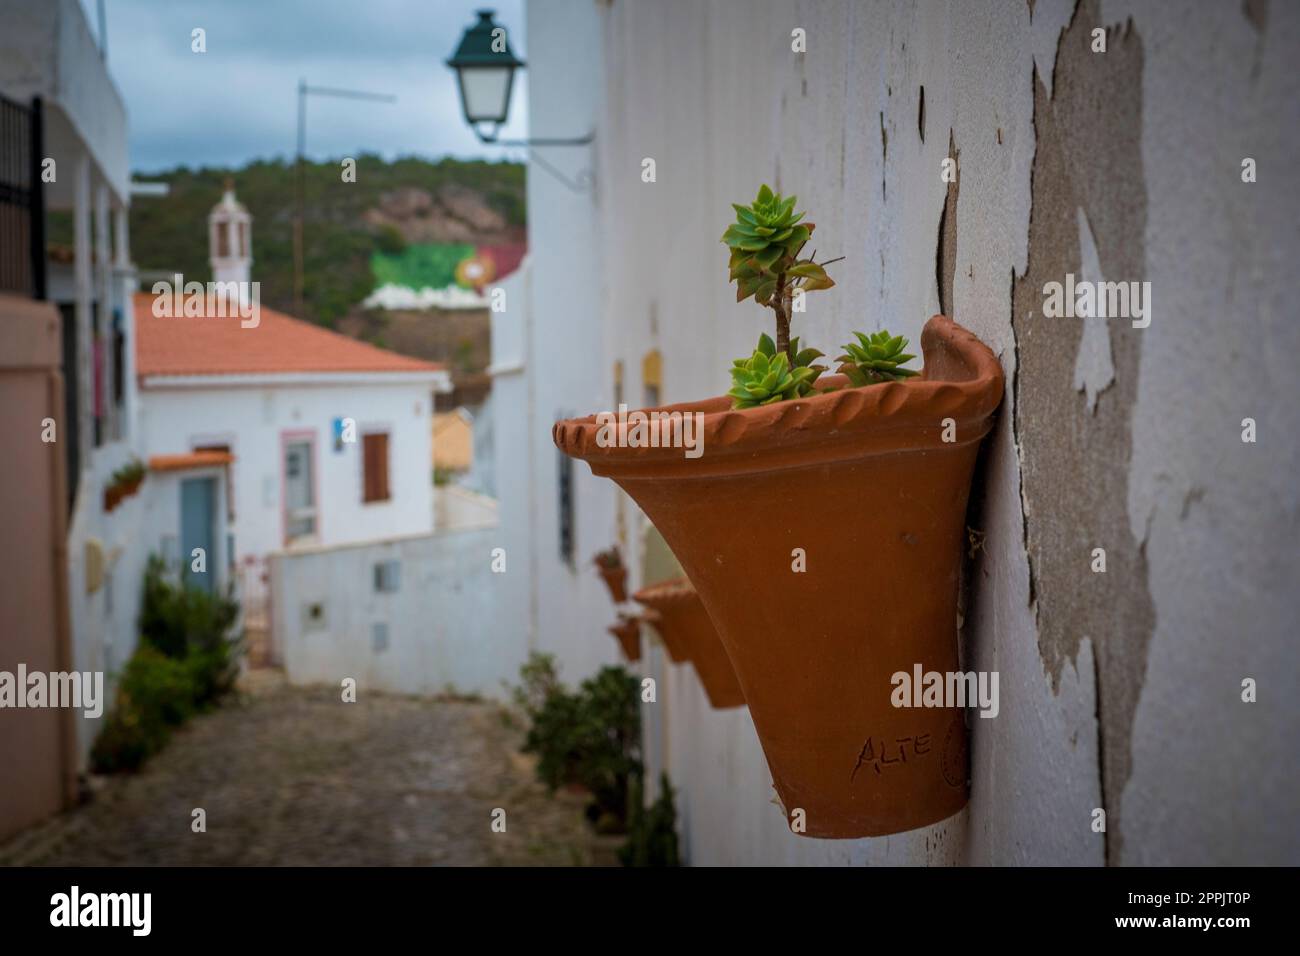 View on the streets of Alte, cozy village in the Algarve in Portugal. Stock Photo